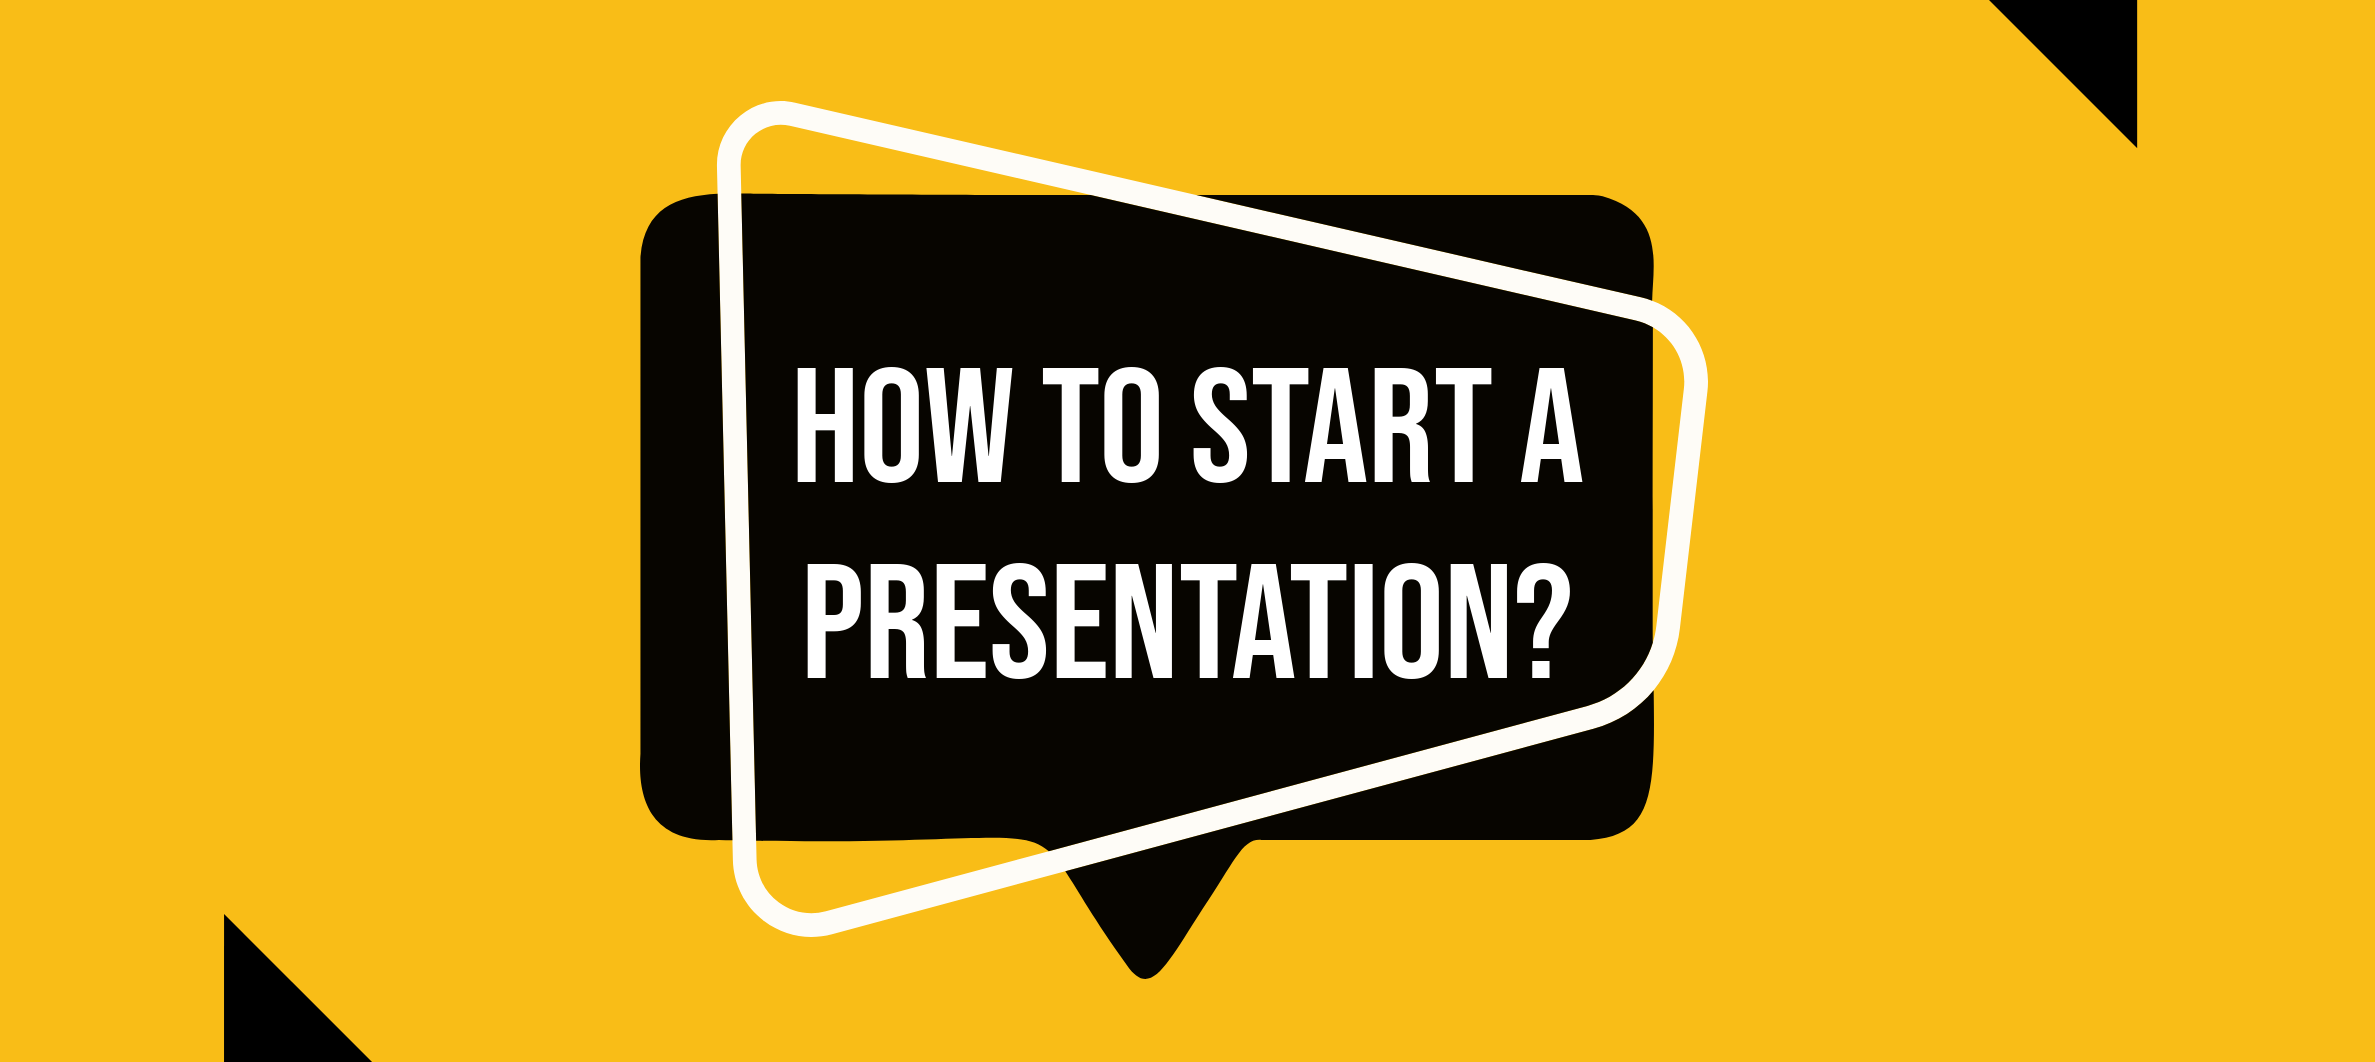 take a look at the presentation